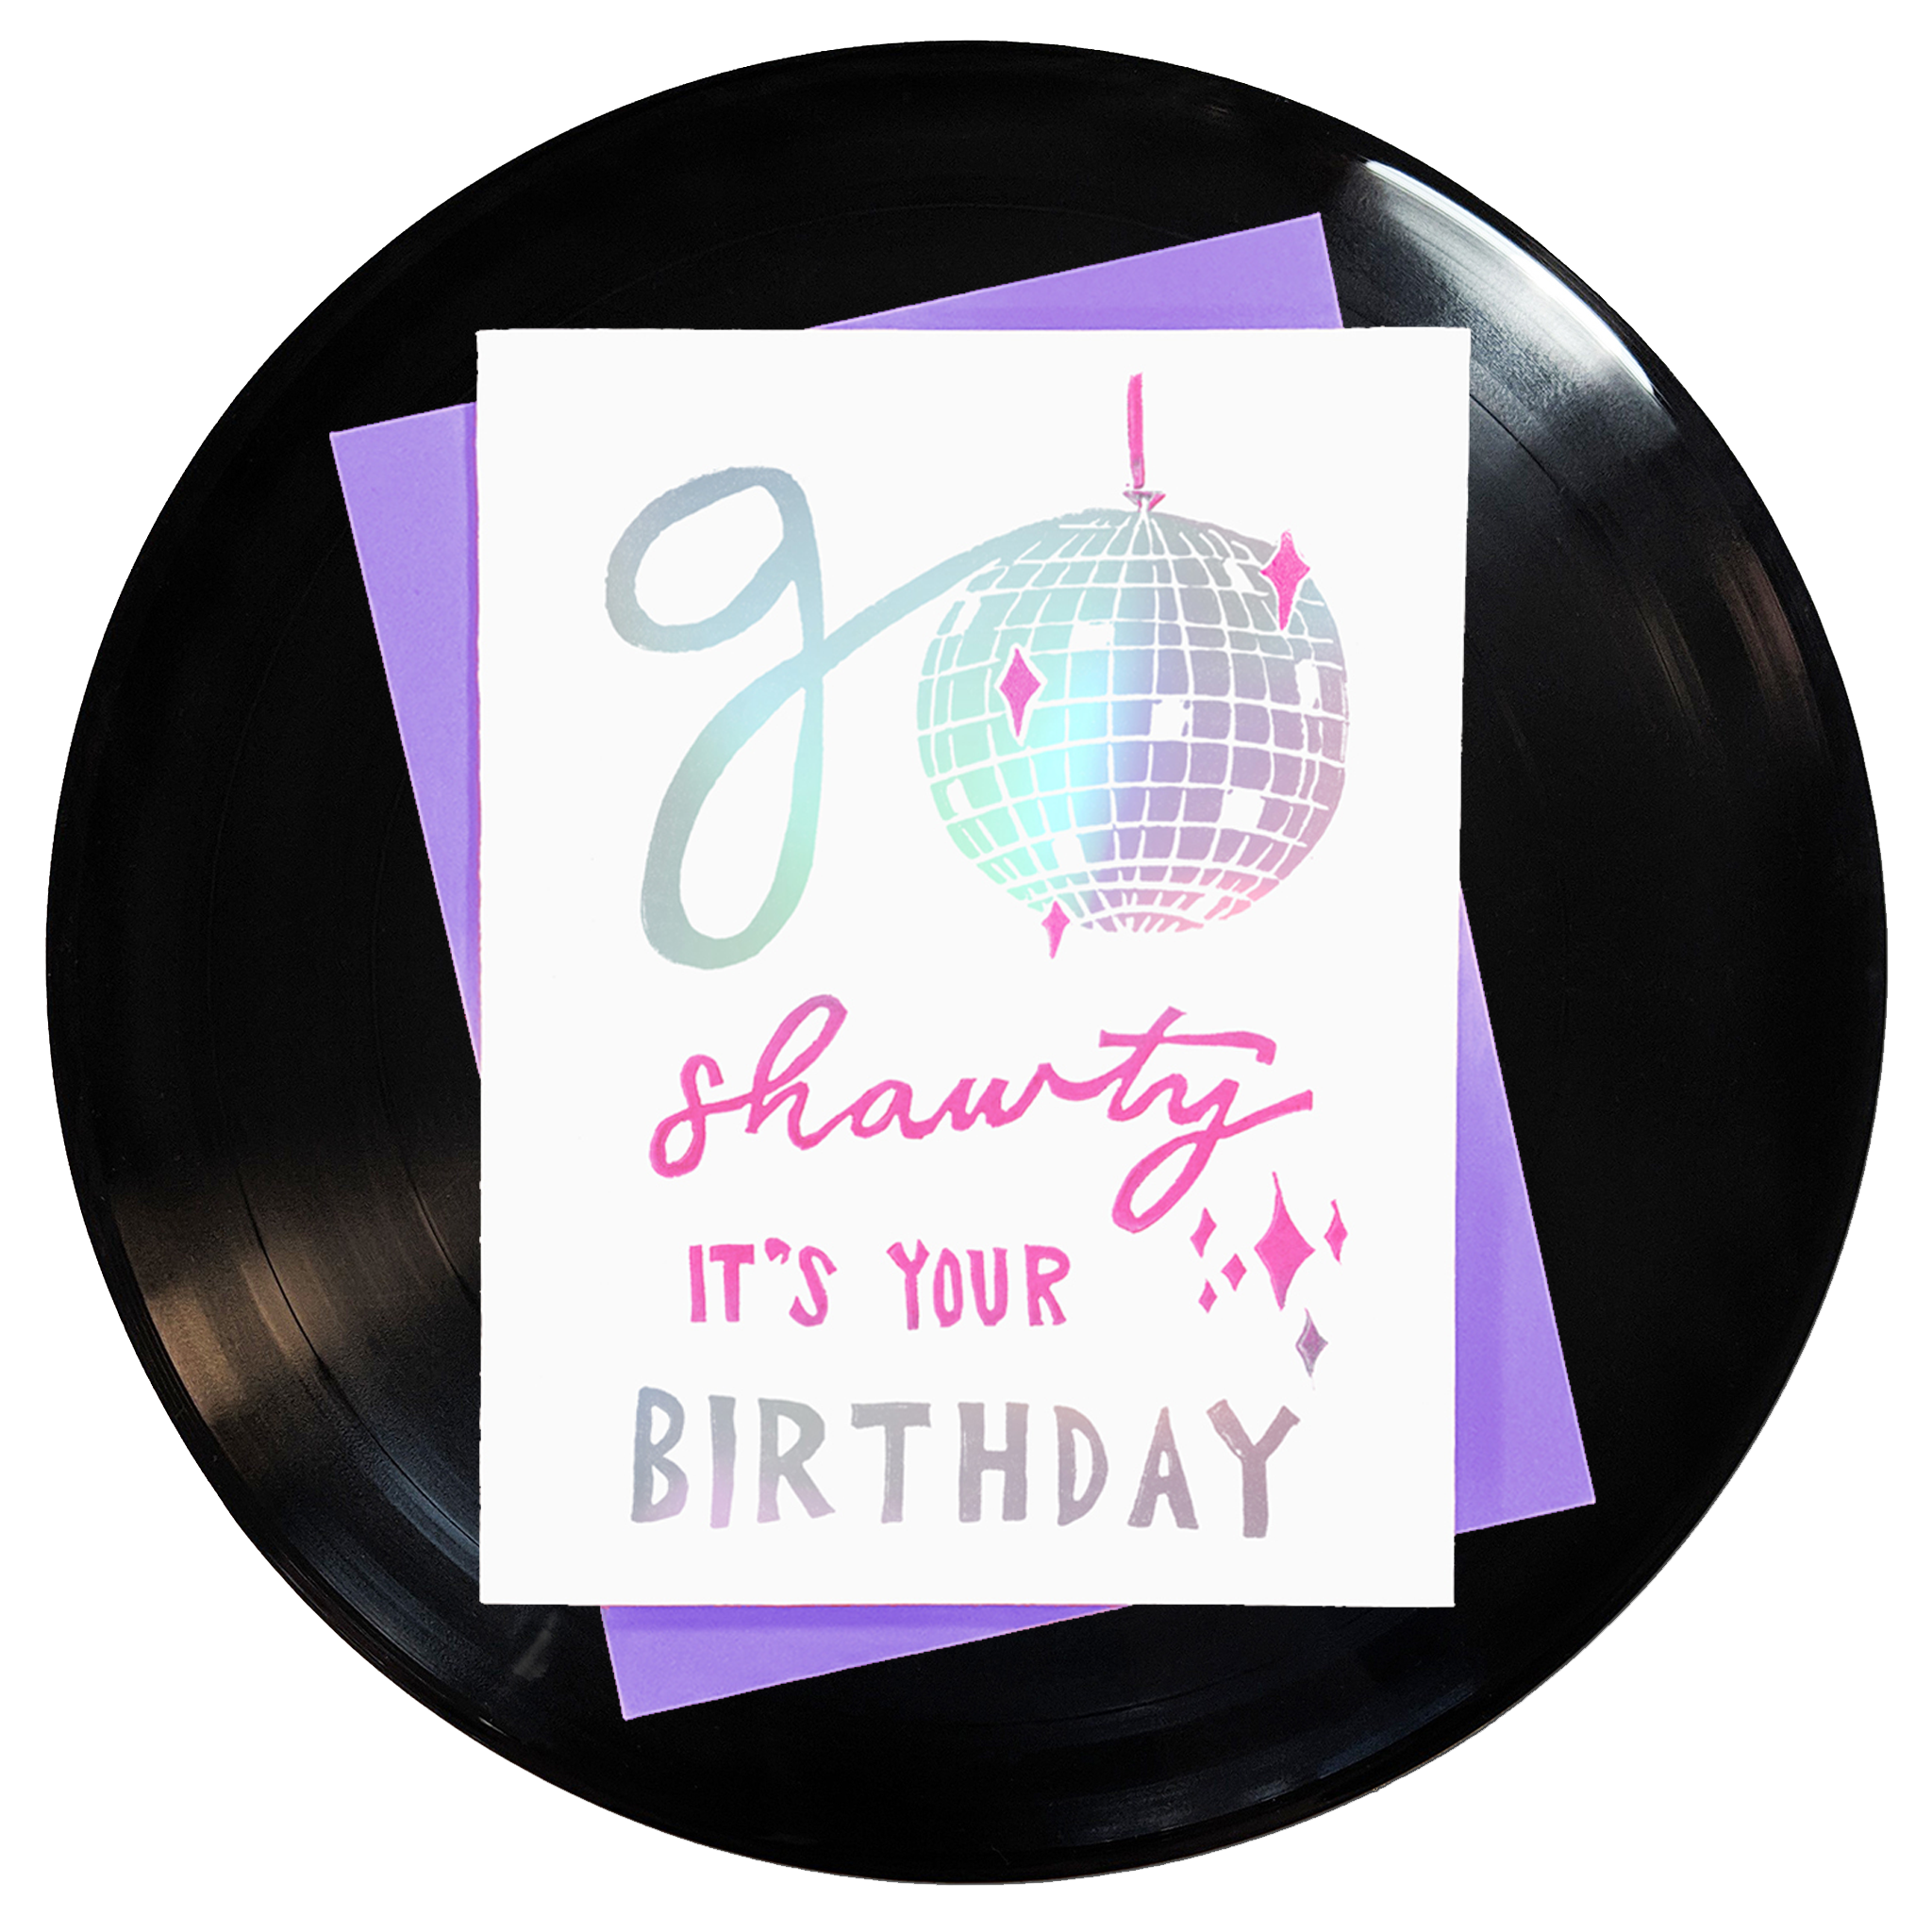 the words go shawty it's your birthday in shiny holographic rainbow foil with pink accents & a shiny disco ball for the o on top of a purple envelope. block printing by Niki Baker with foreignspell from hand-carved stamps & song lyrics.